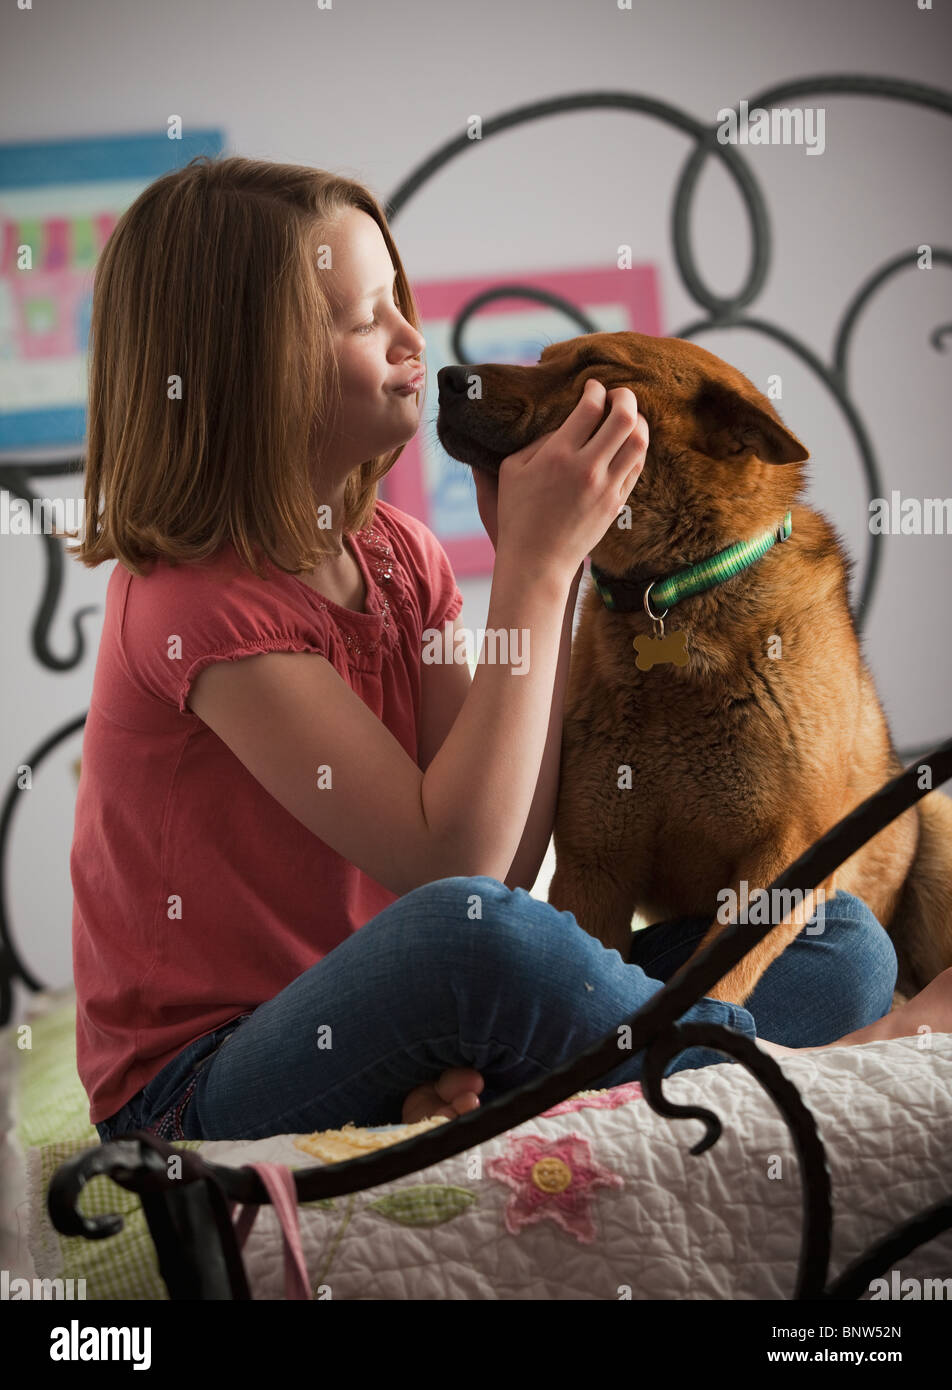 Young girl playing with dog on bed Stock Photo